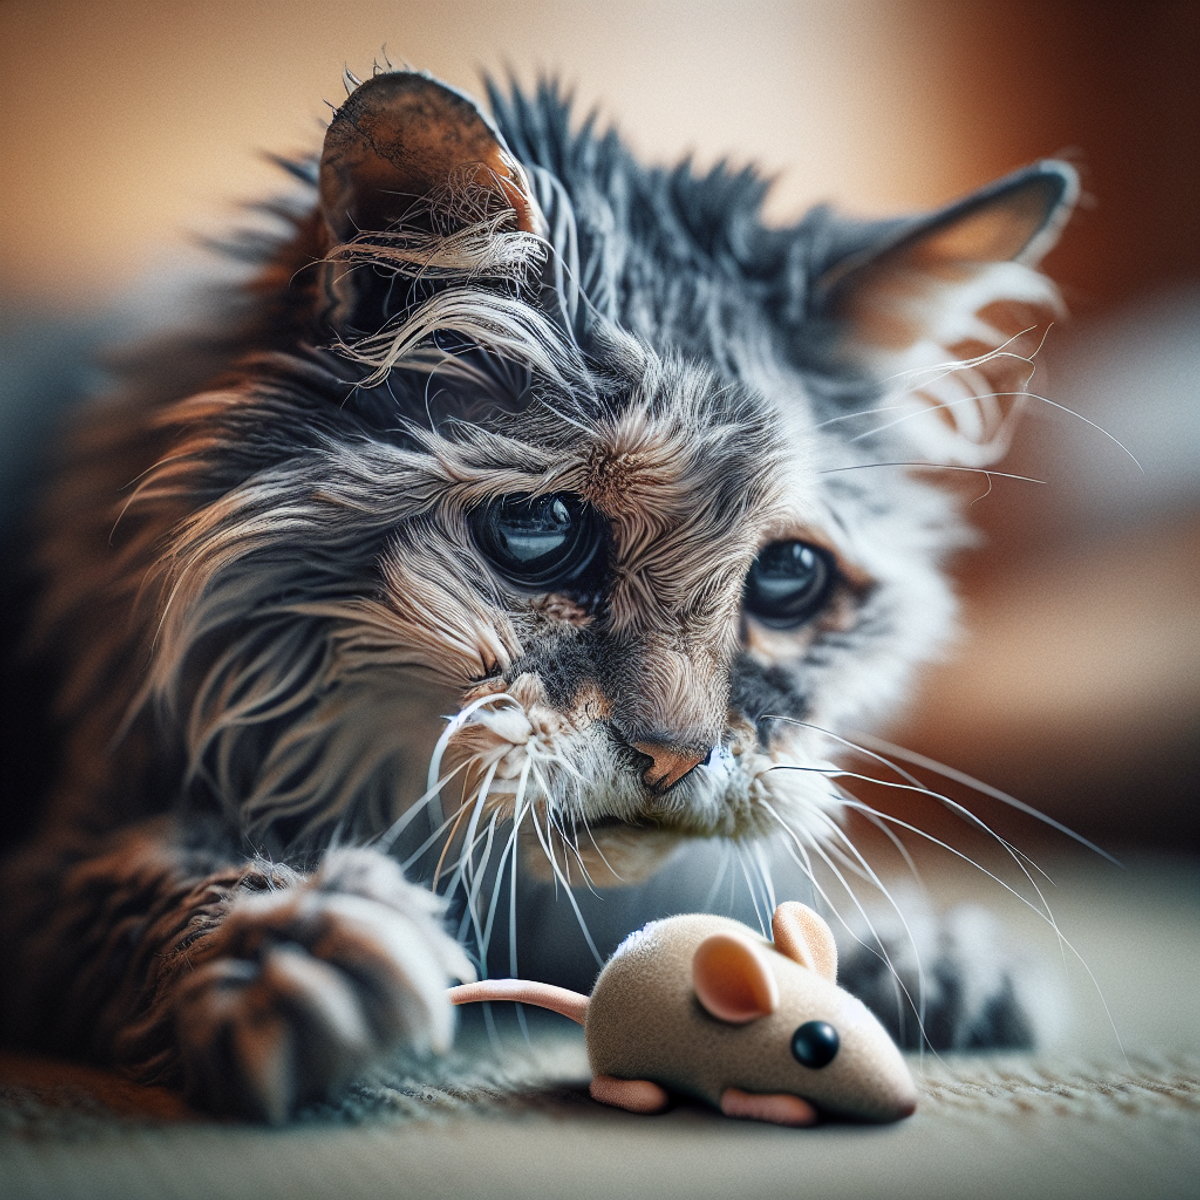 An elderly cat with gray fur and long whiskers playing with a toy mouse, eyes sparkling with interest.